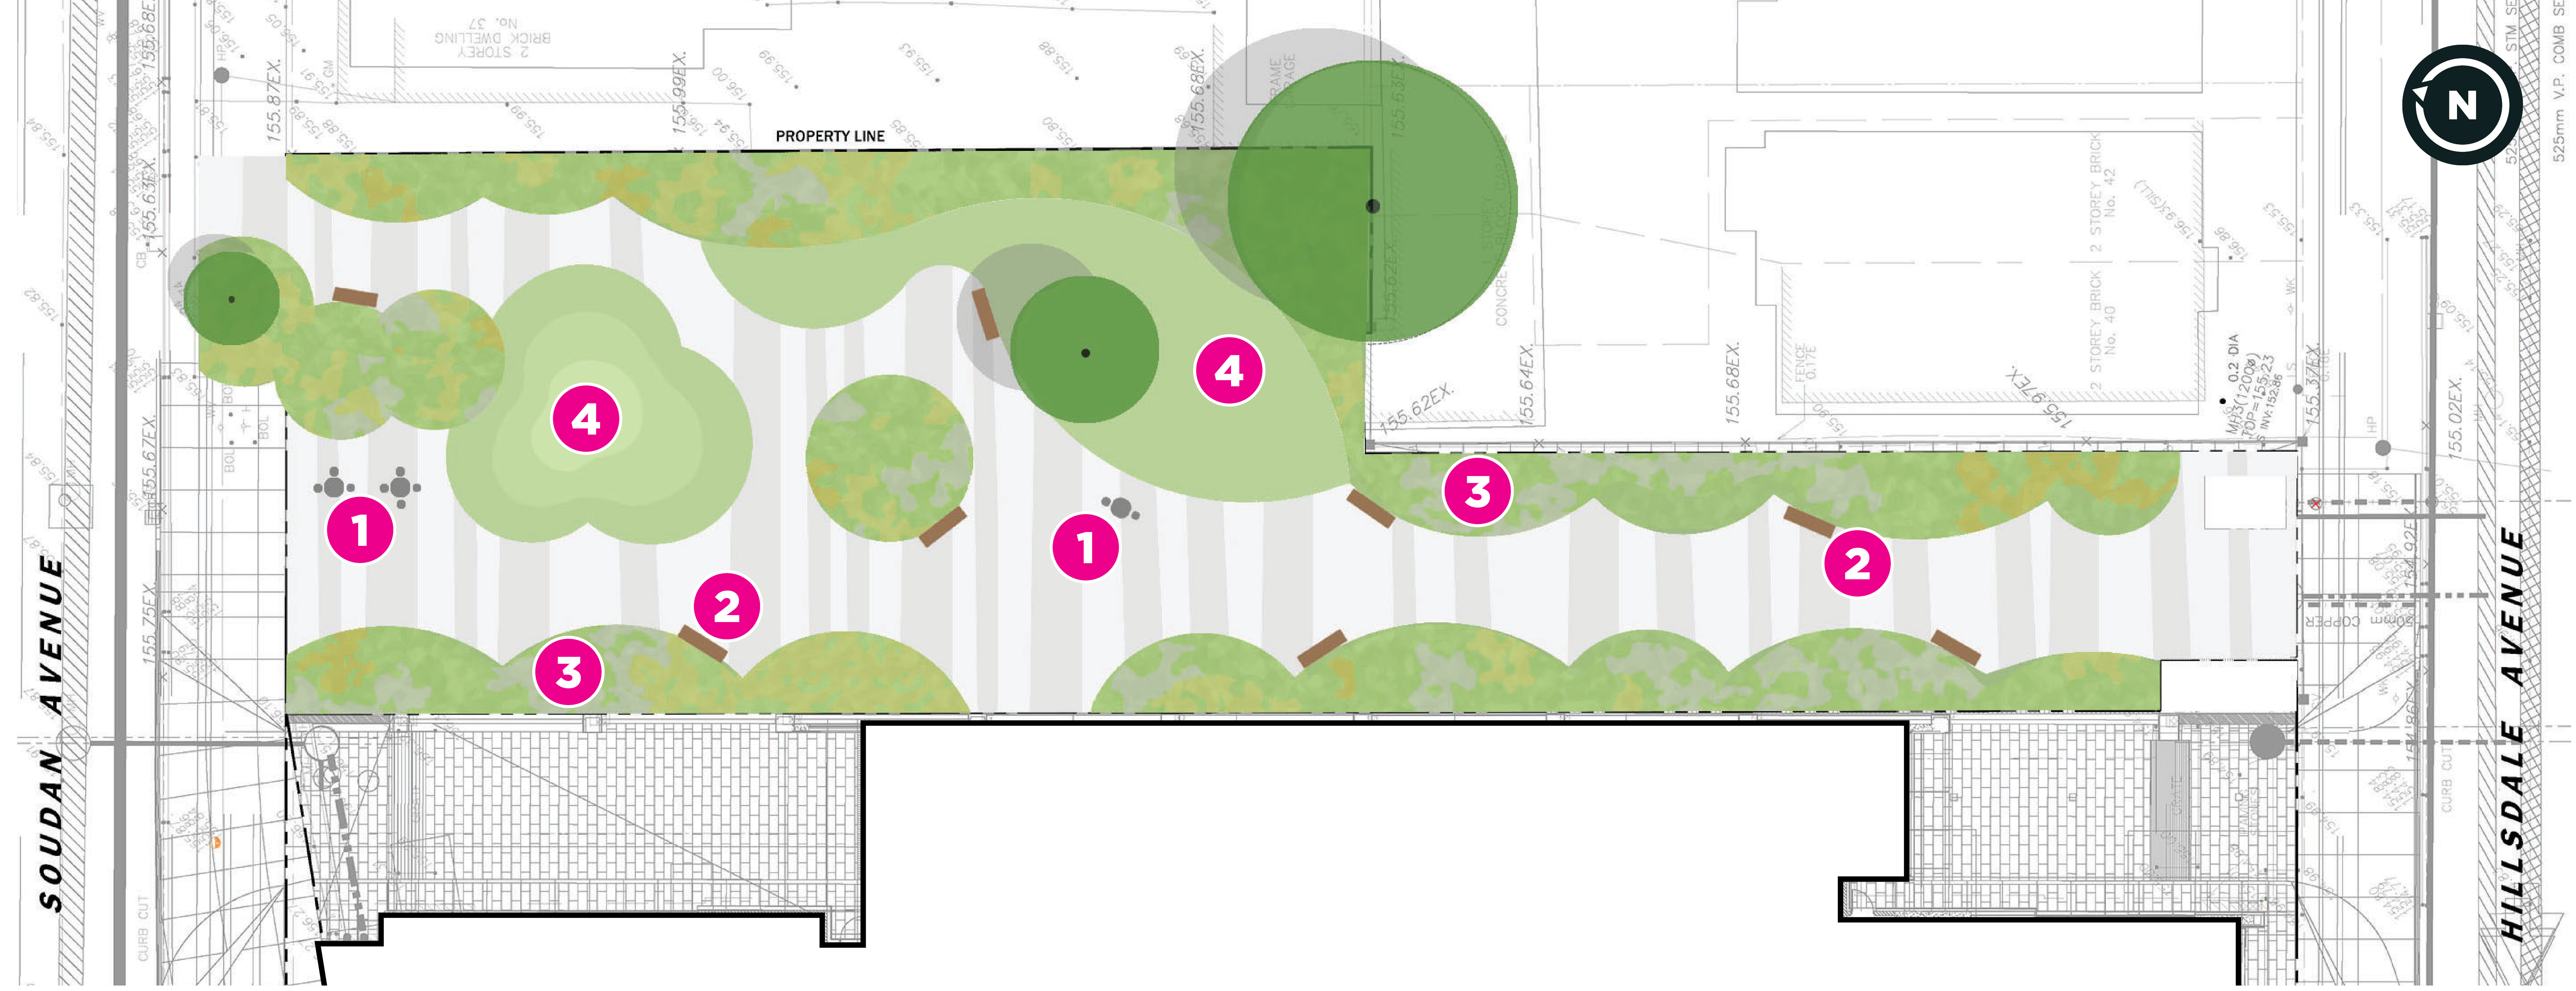 An image of the final design for the Hillsdale Avenue Park Expansion and Redesign. New features and existing roads and infrastructure are labeled in the plan and include seating throughout the park, an open lawn area in the centre, and a central pathway connecting Soudan Avenue and Hillsdale Avenue, with planting beds along the walkway. 